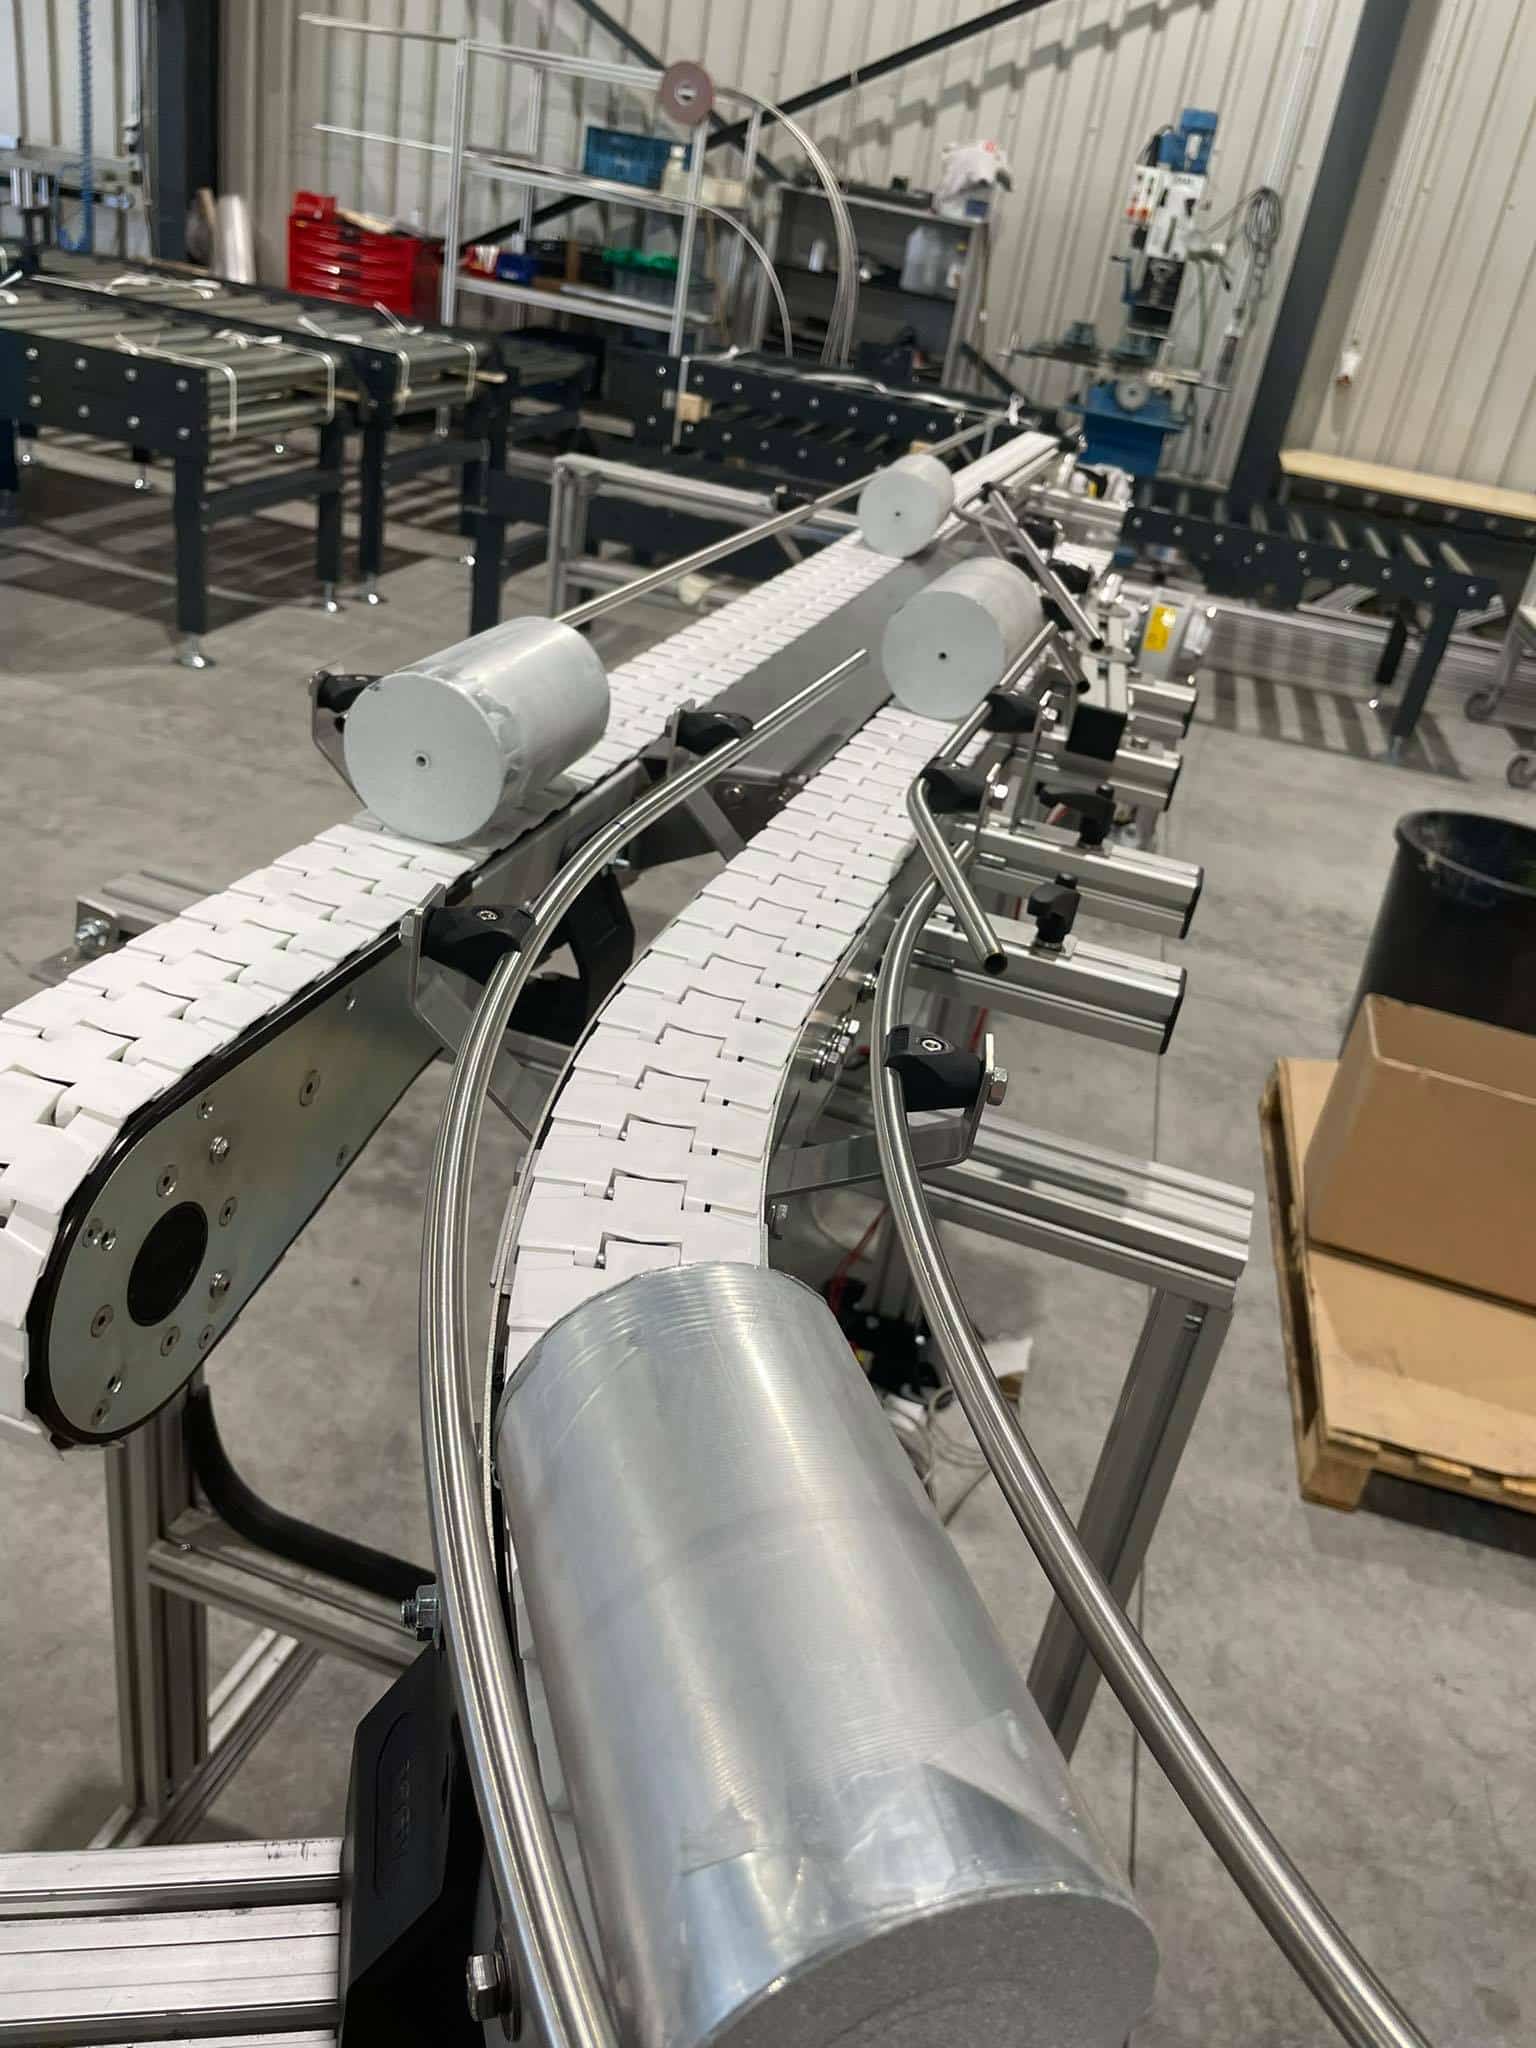 An example of our conveyor belts for manufacturing. This one is located in a factory of Toyota.